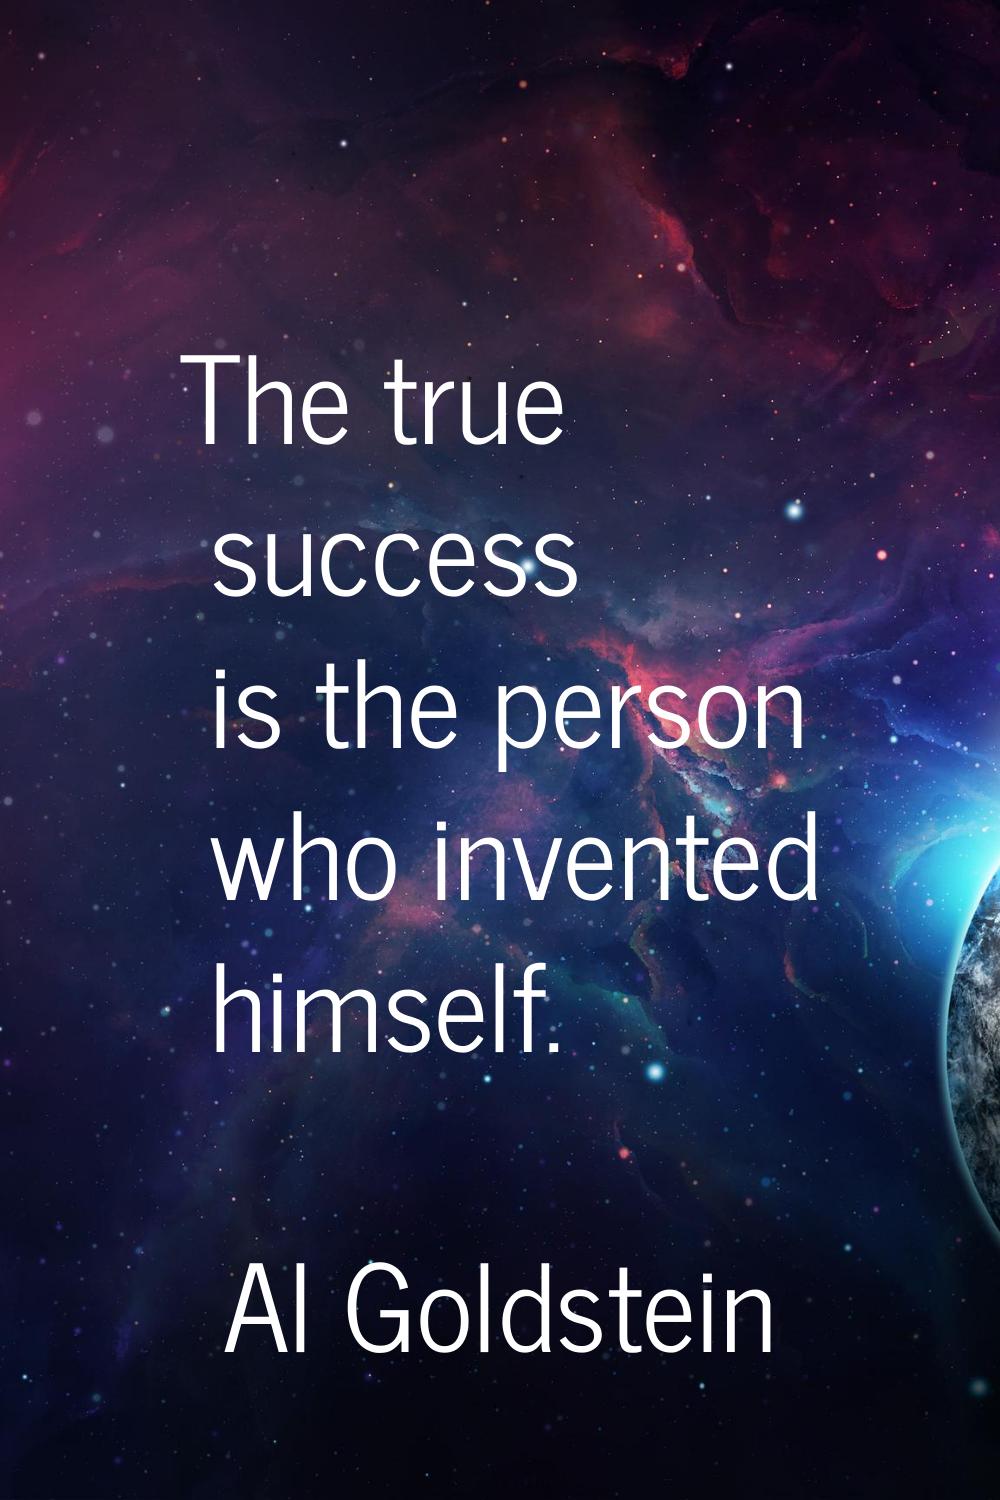 The true success is the person who invented himself.